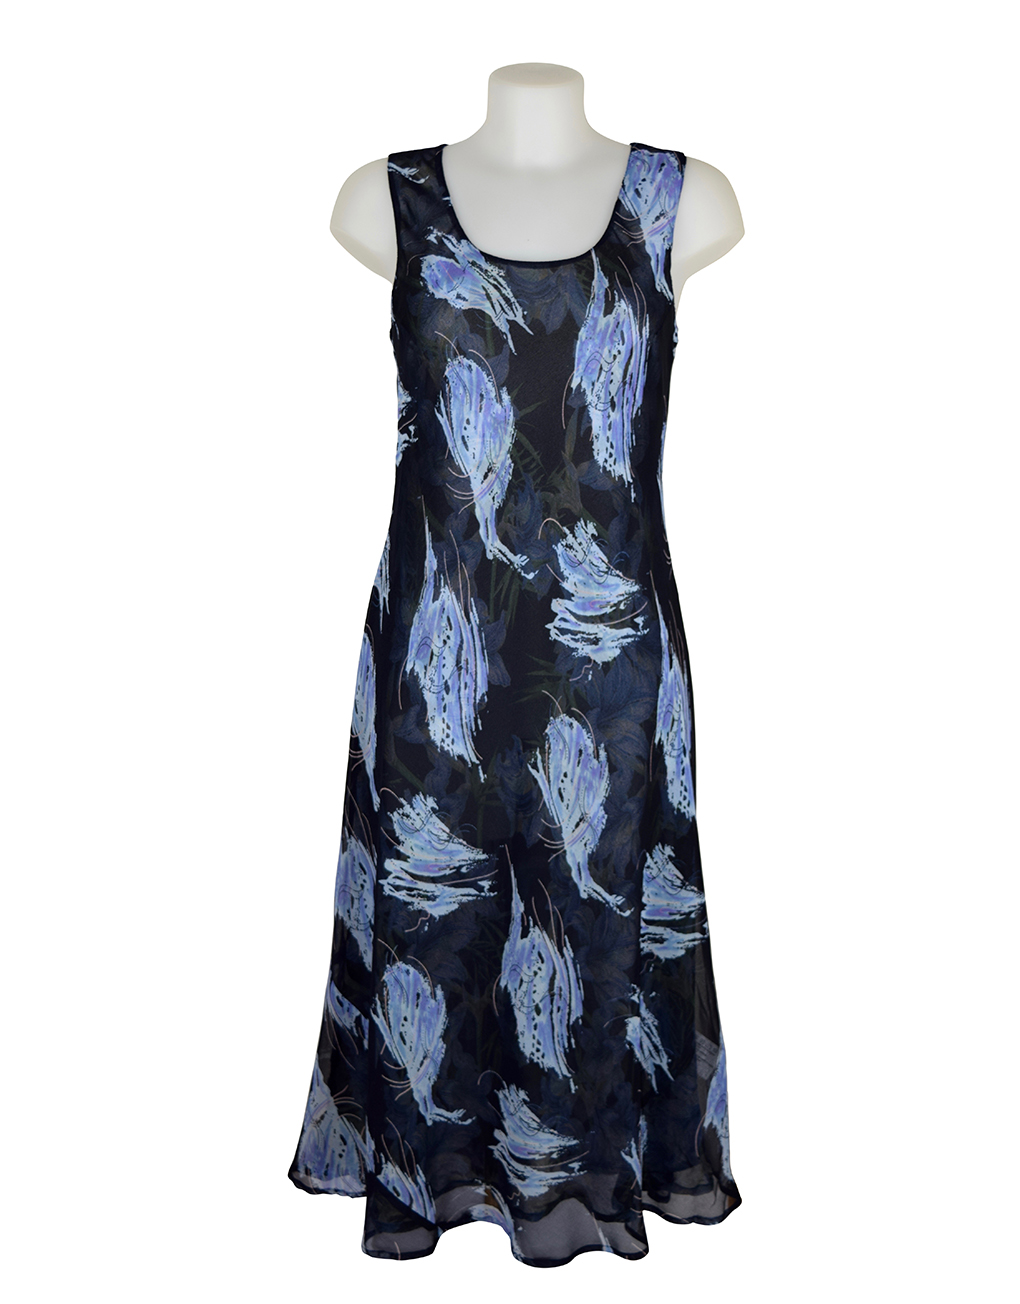 Paramour Reversible 2 in 1 dress